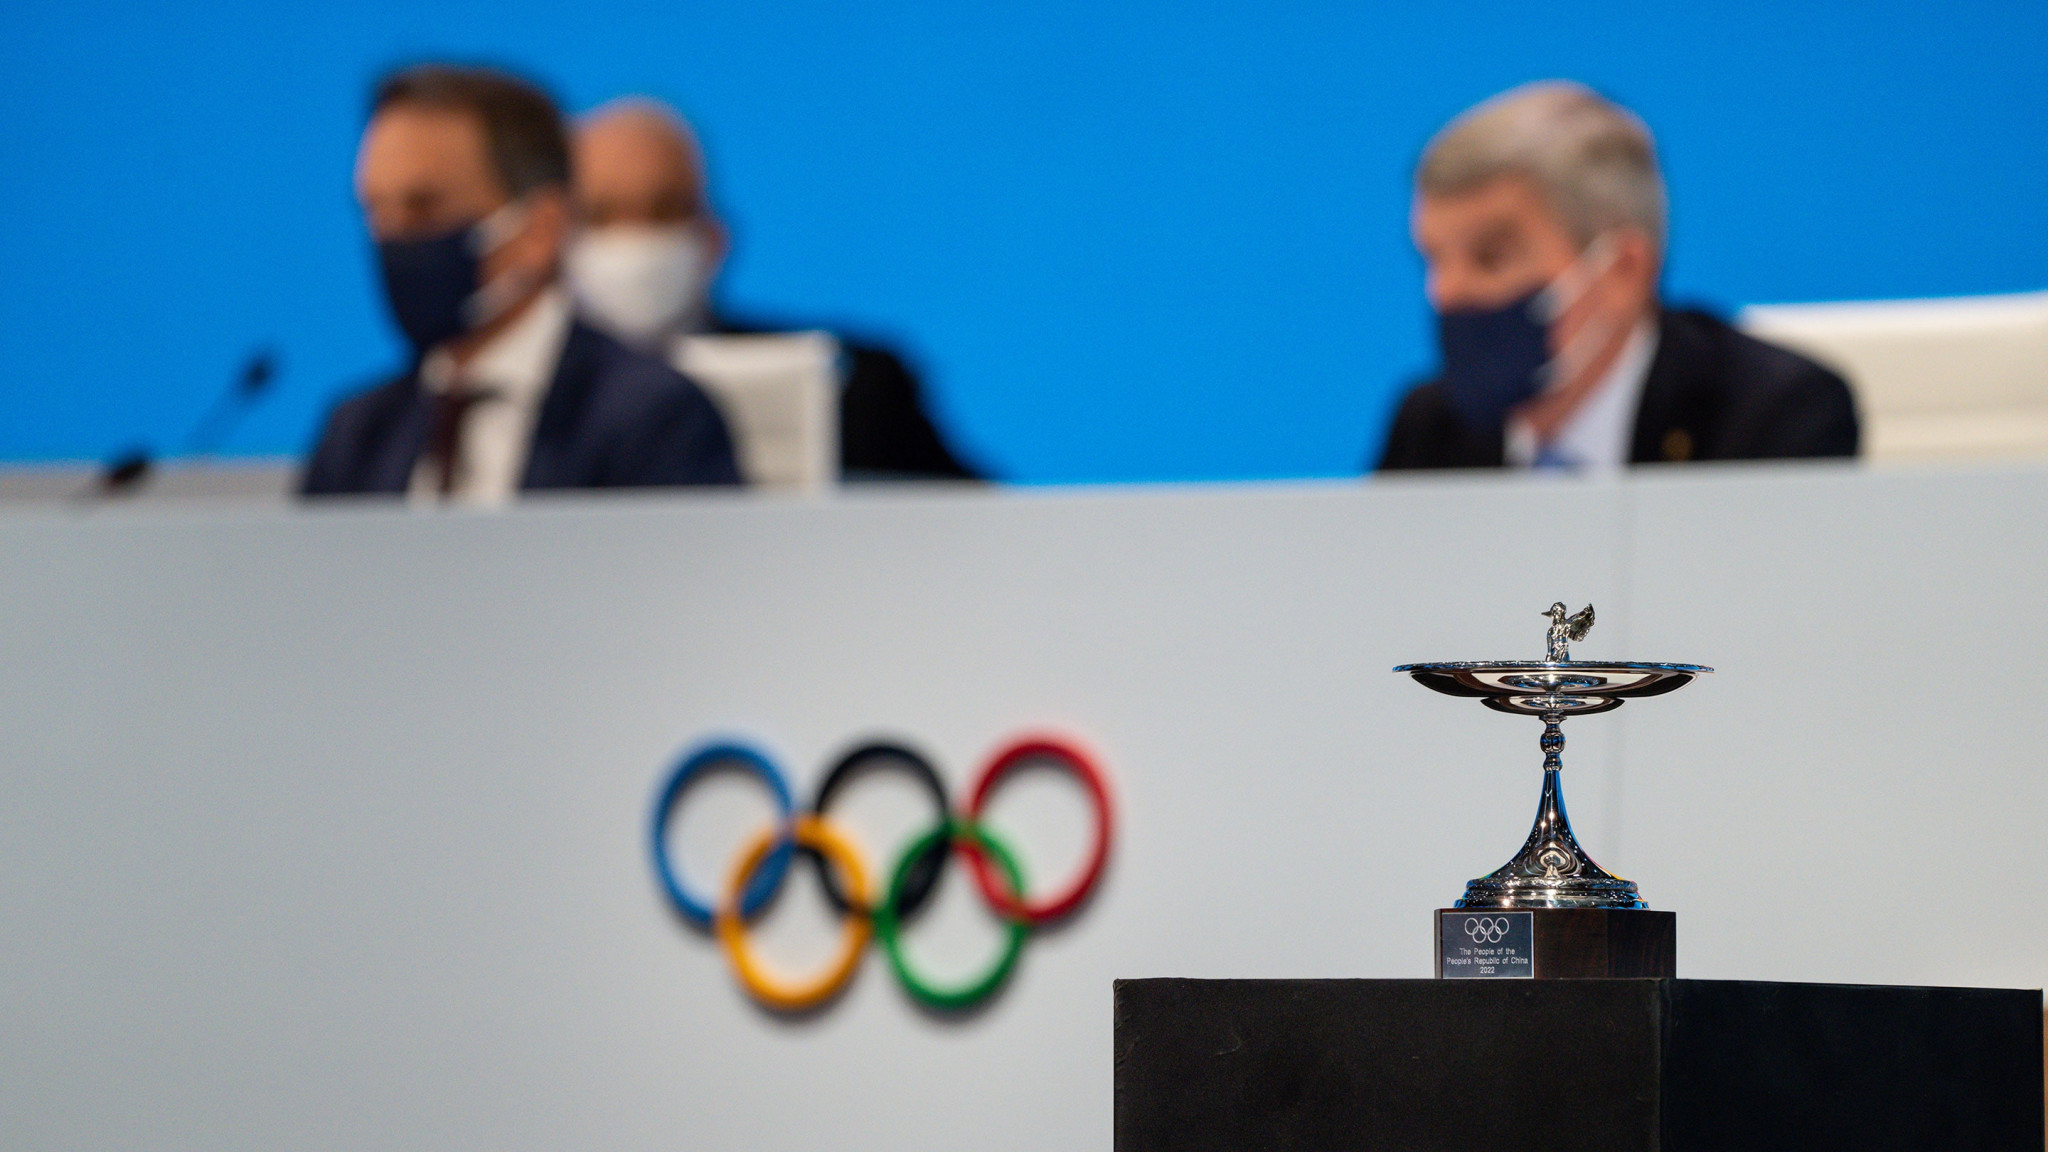 China has been awarded the Olympic Cup, it was announced during the IOC Session in Beijing today ©Getty Images